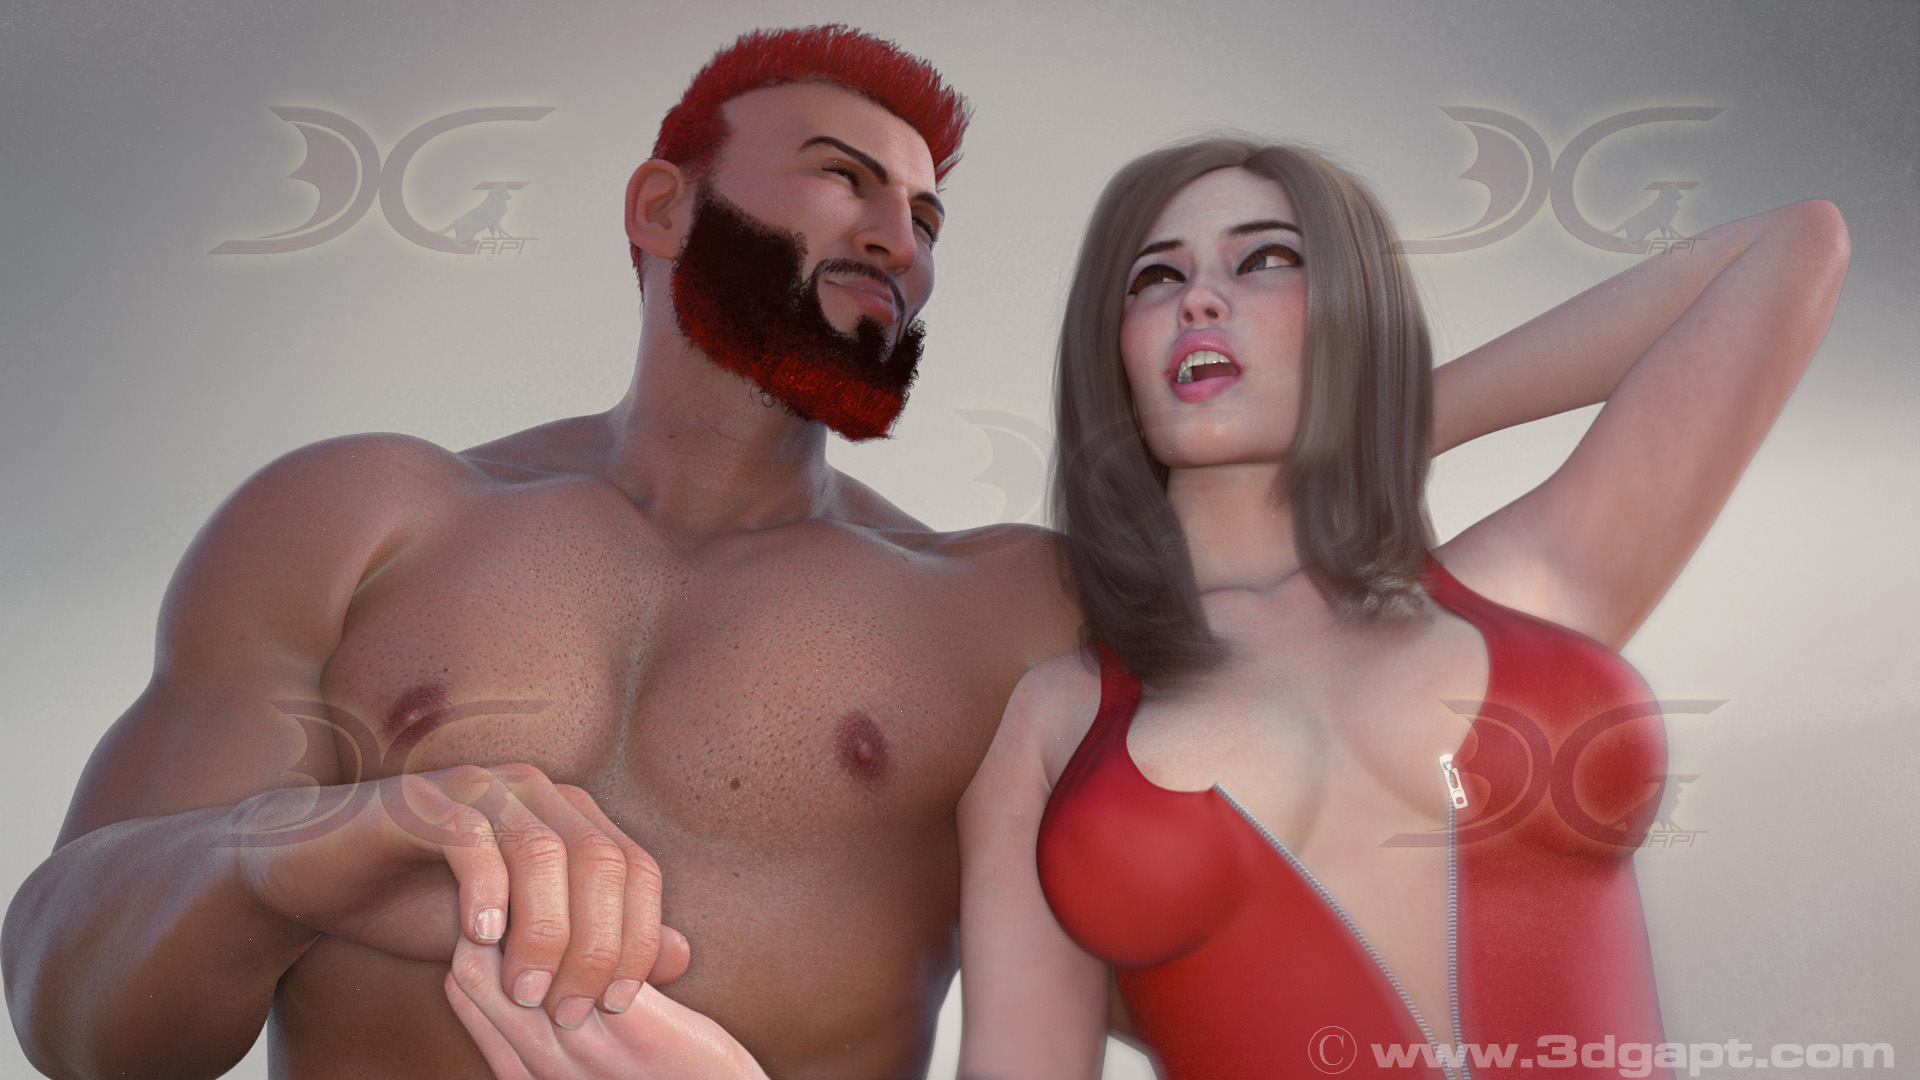 3d Characters man-woman images for book cover7